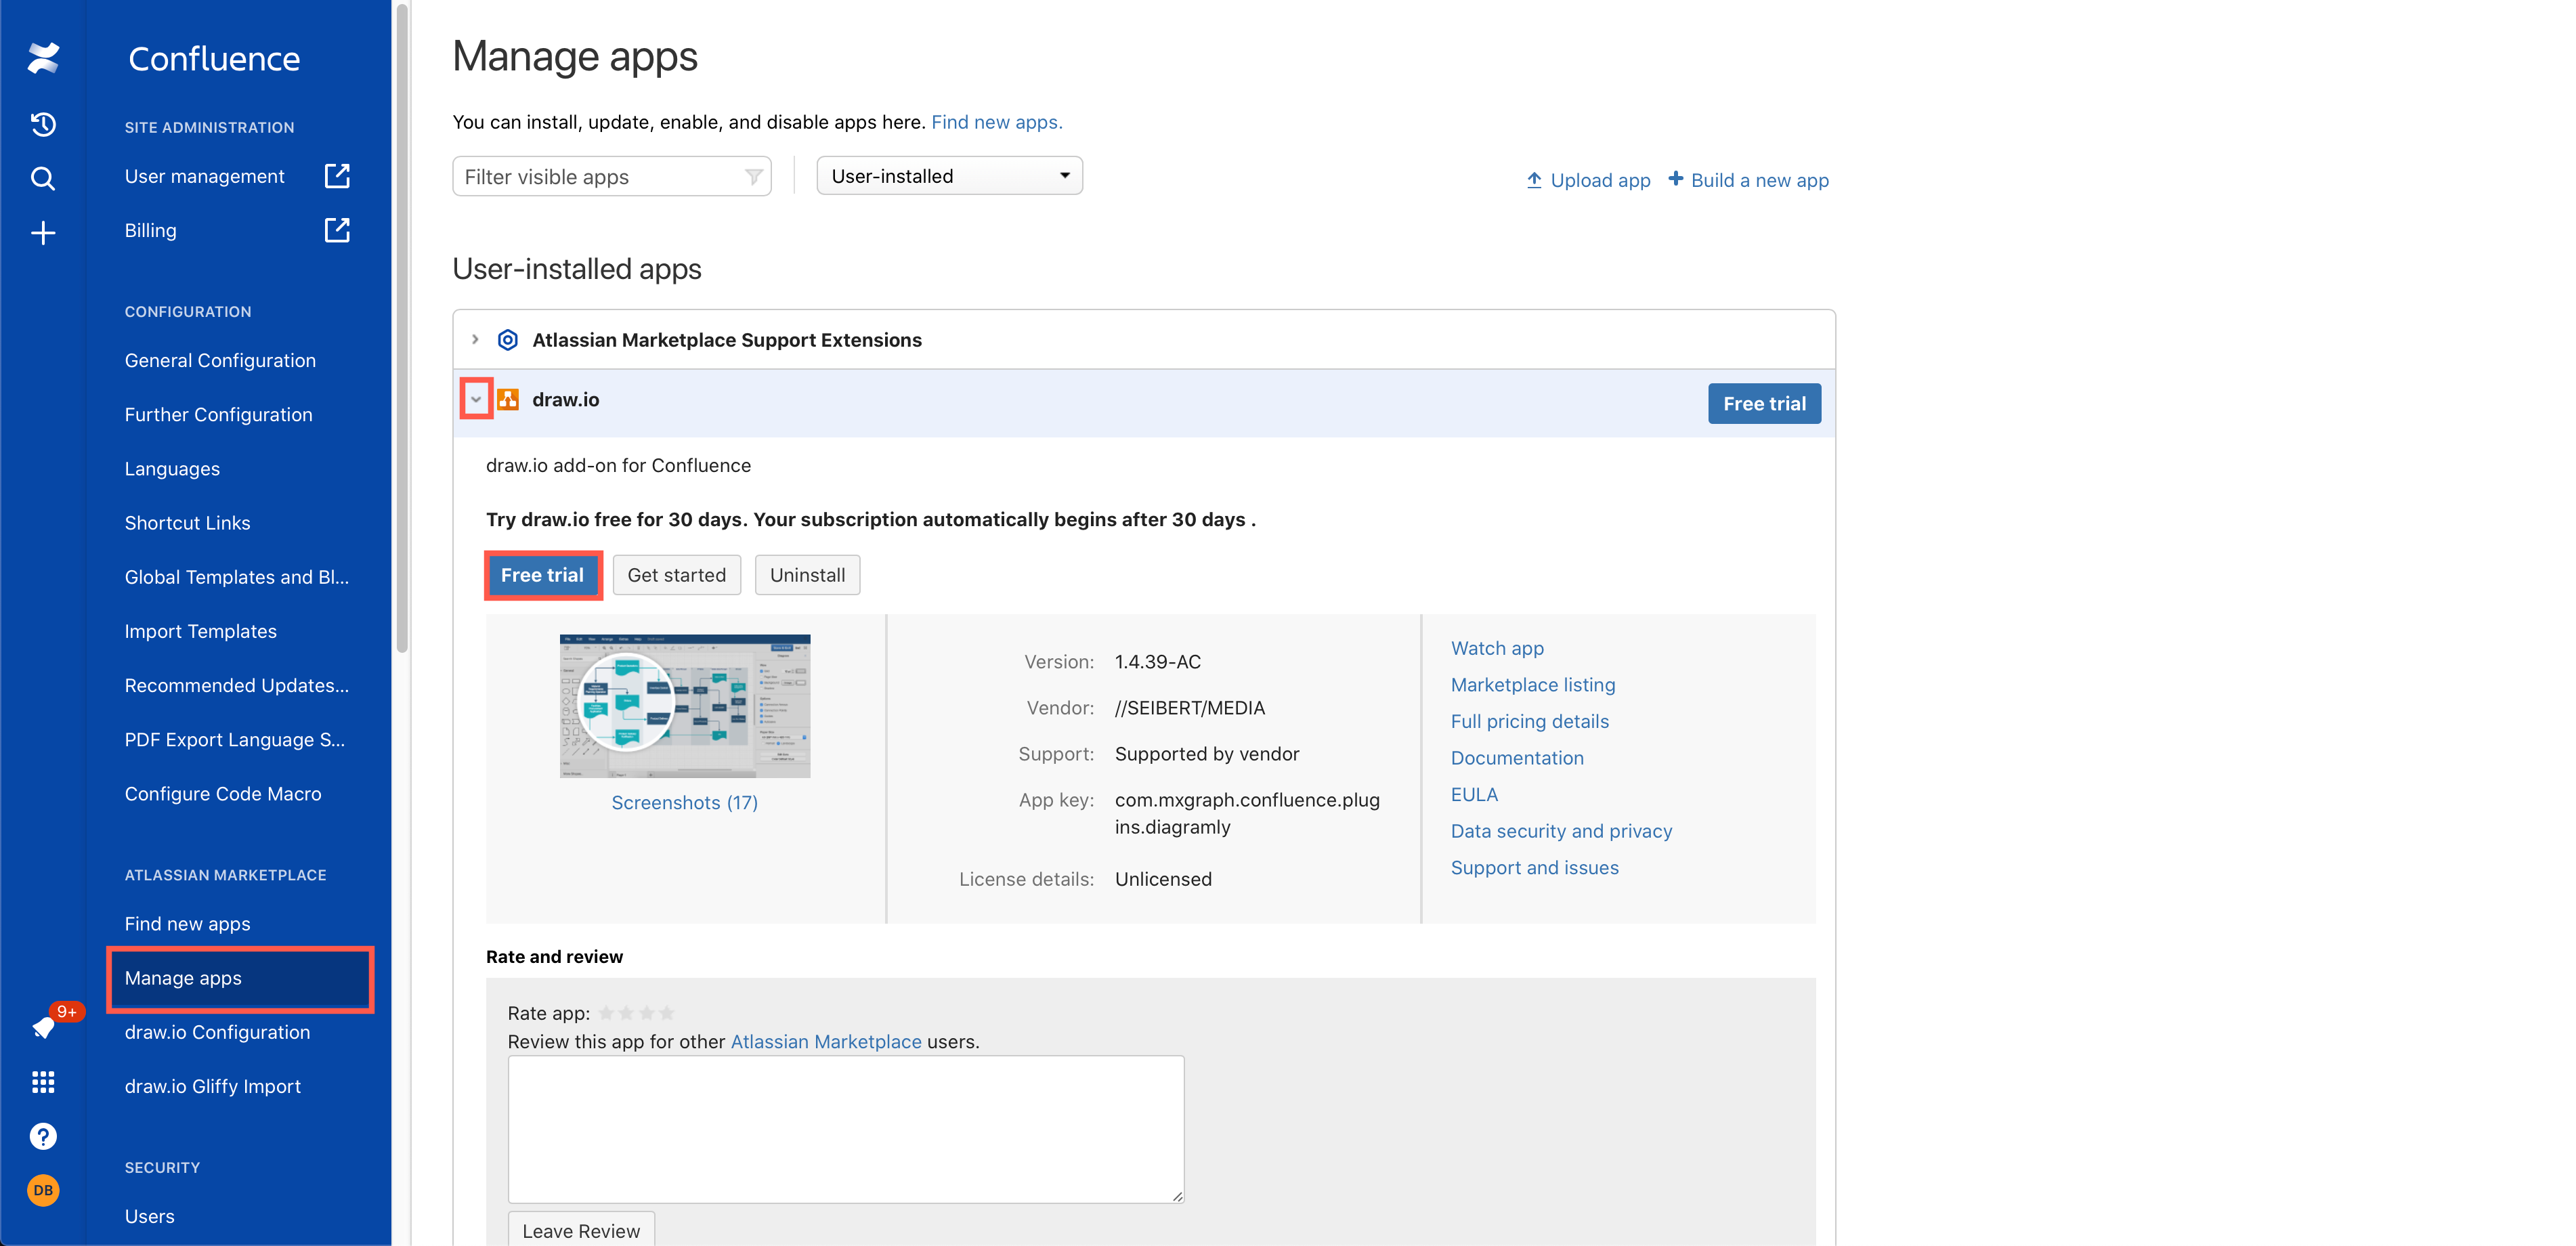 Start the free trial of draw.io for Confluence Cloud via Settings